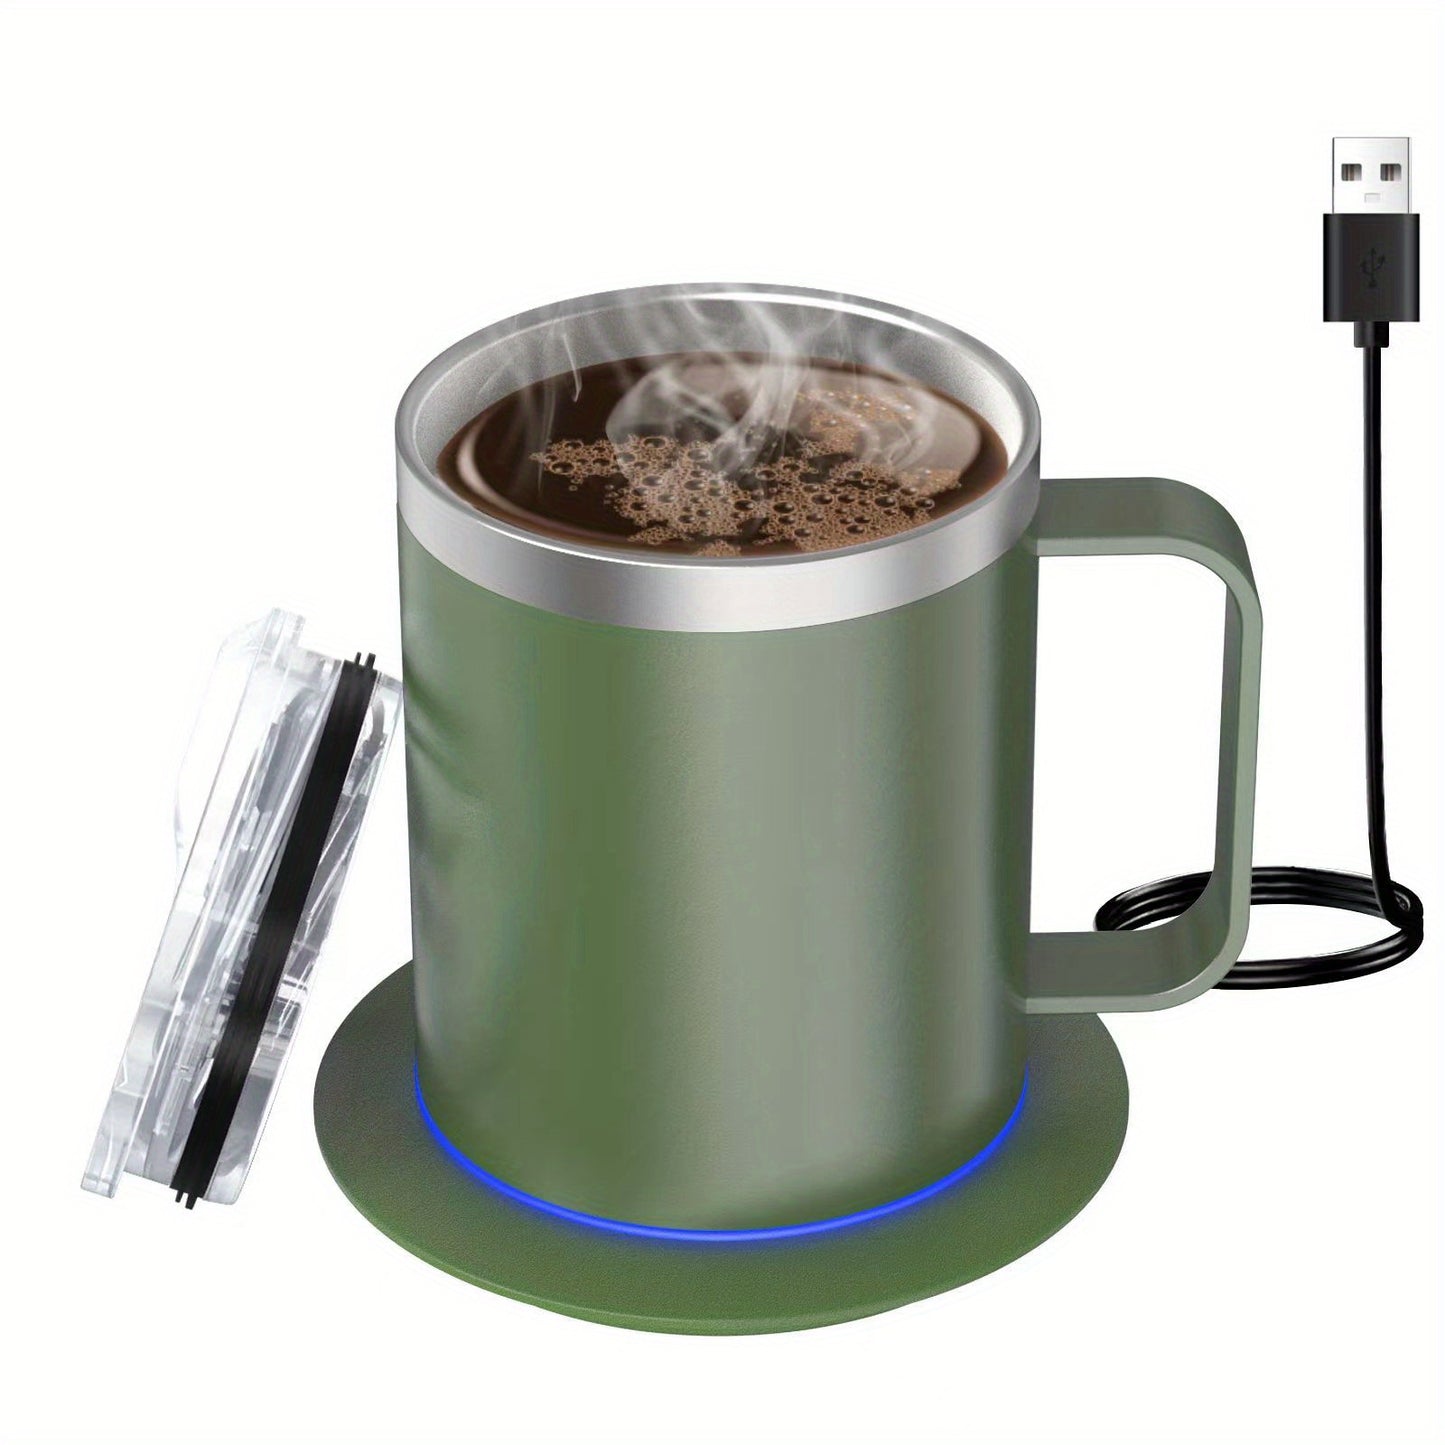 1pc 12 Oz Automatic Heating Stainless Steel Coffee Mug with Lid, USB Powered